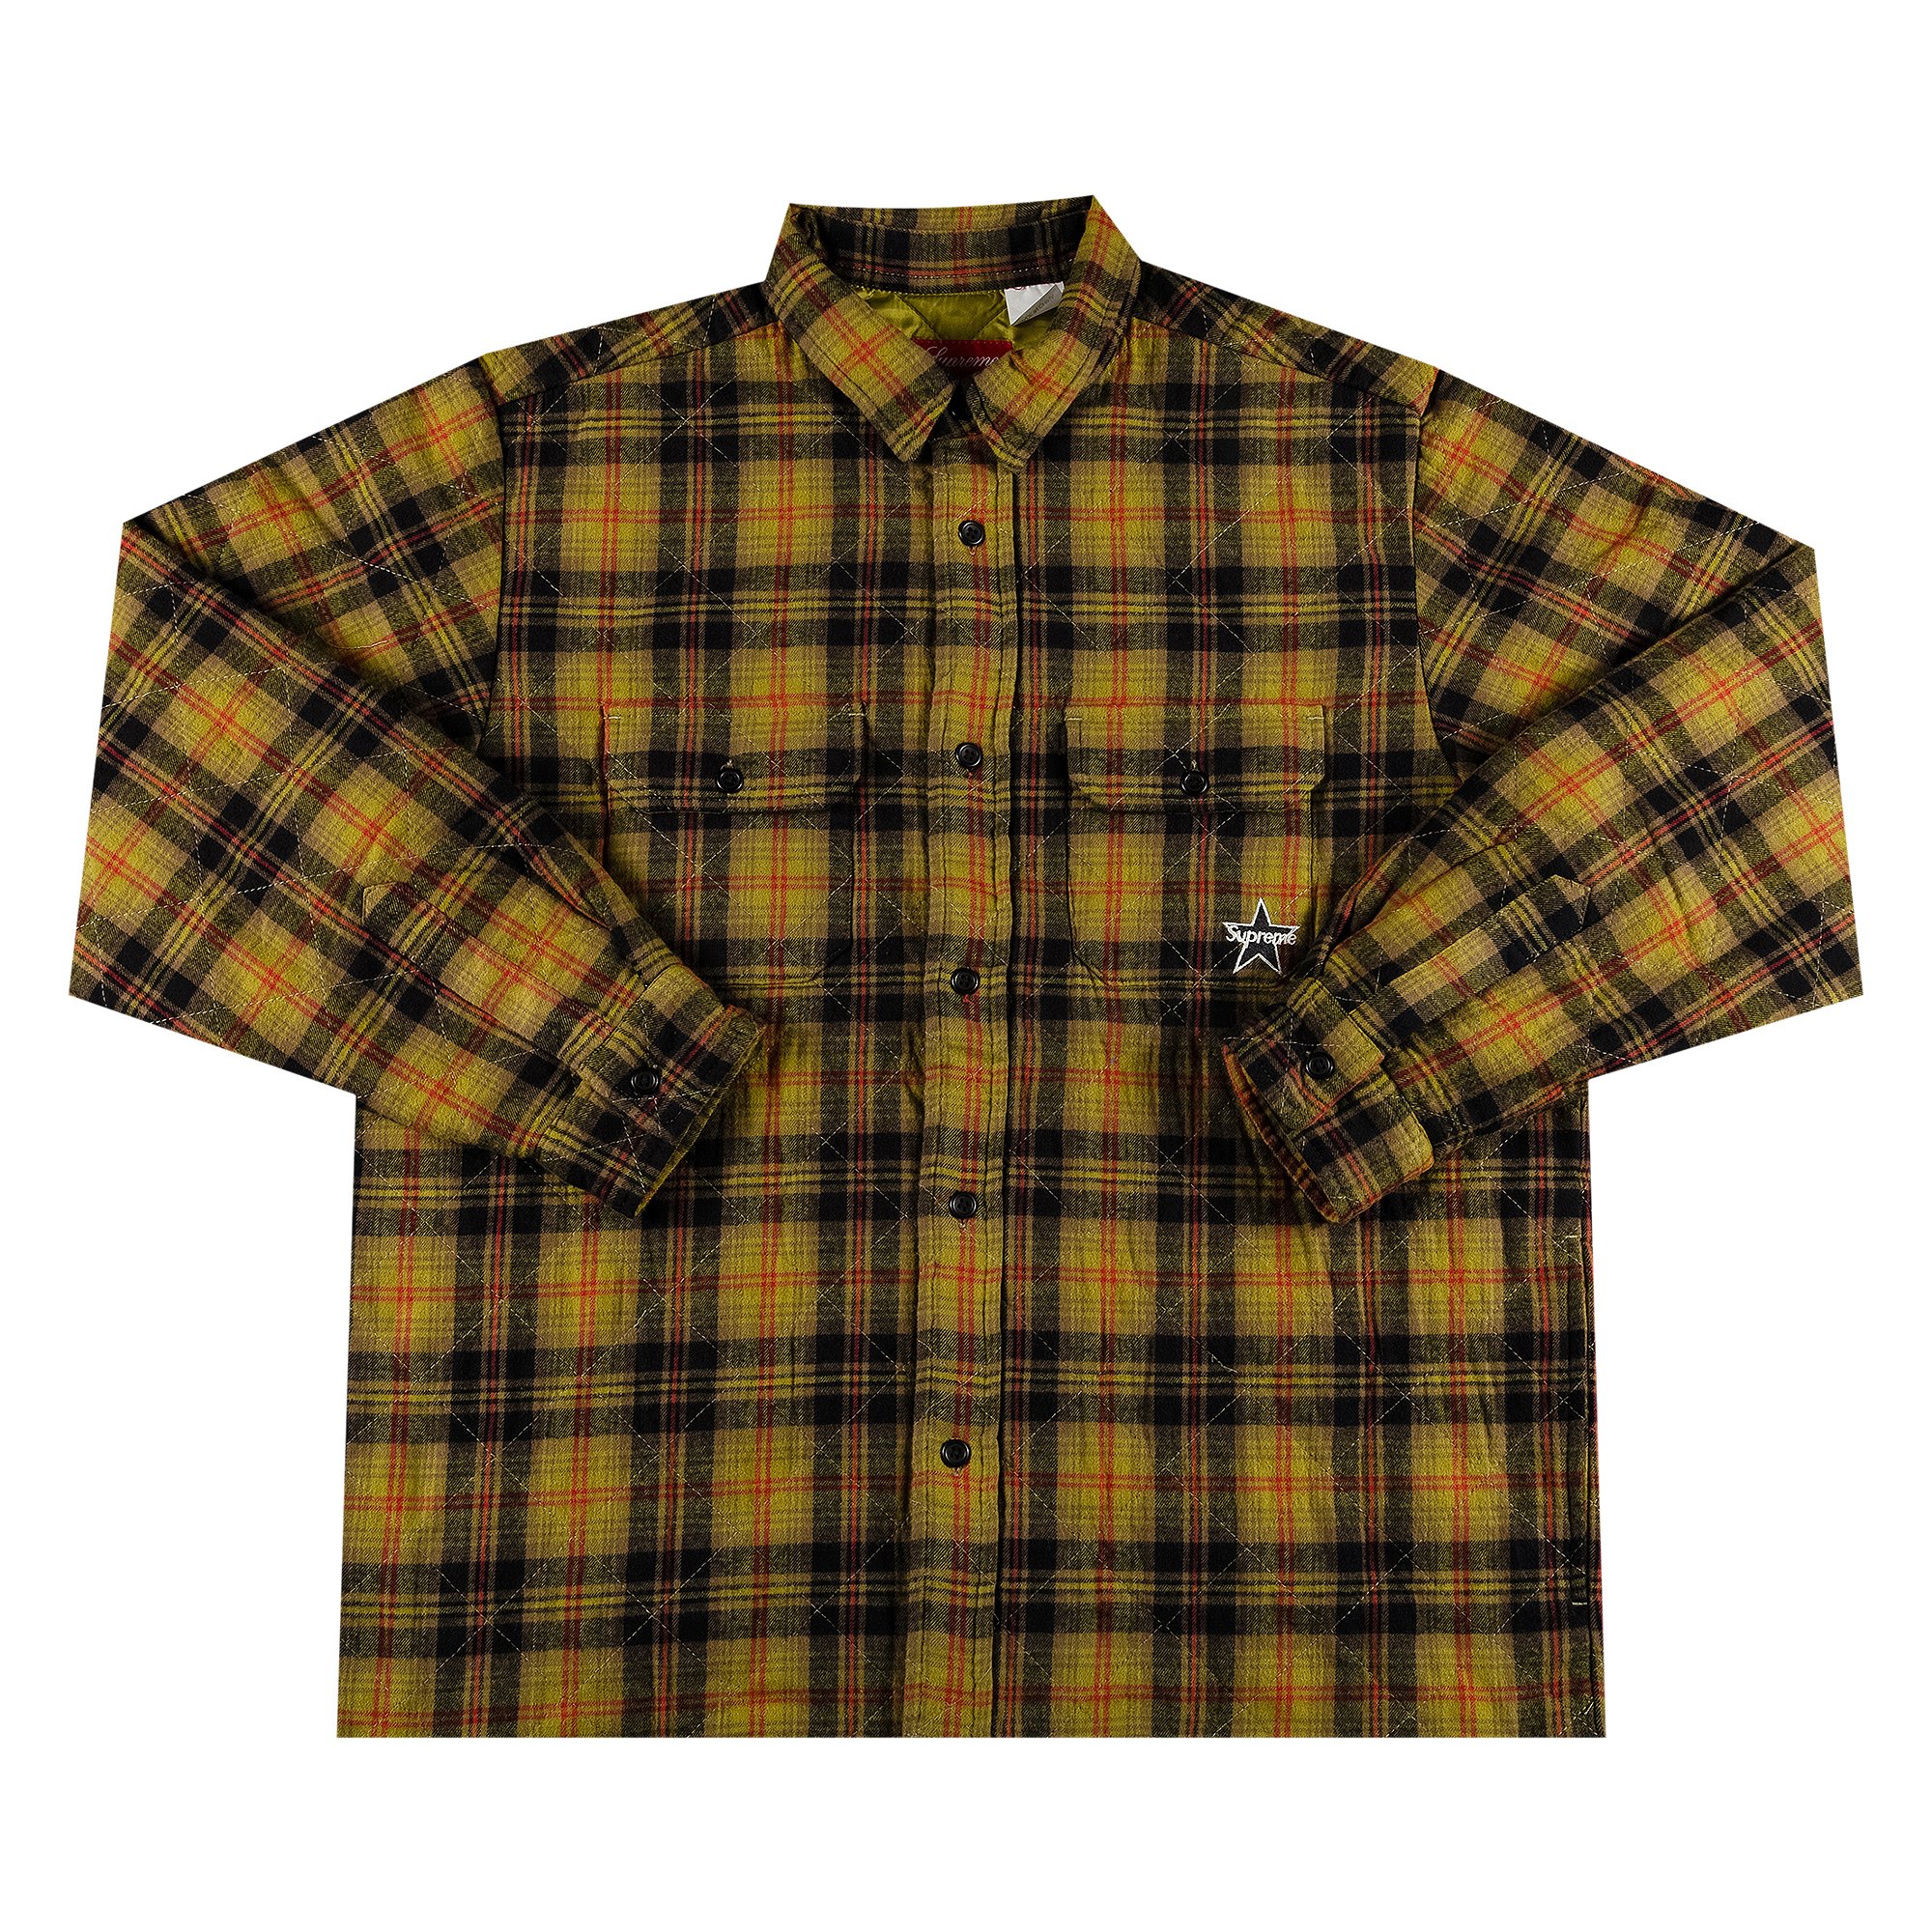 21FW Supreme Quilted Plaid Flannel Shirt